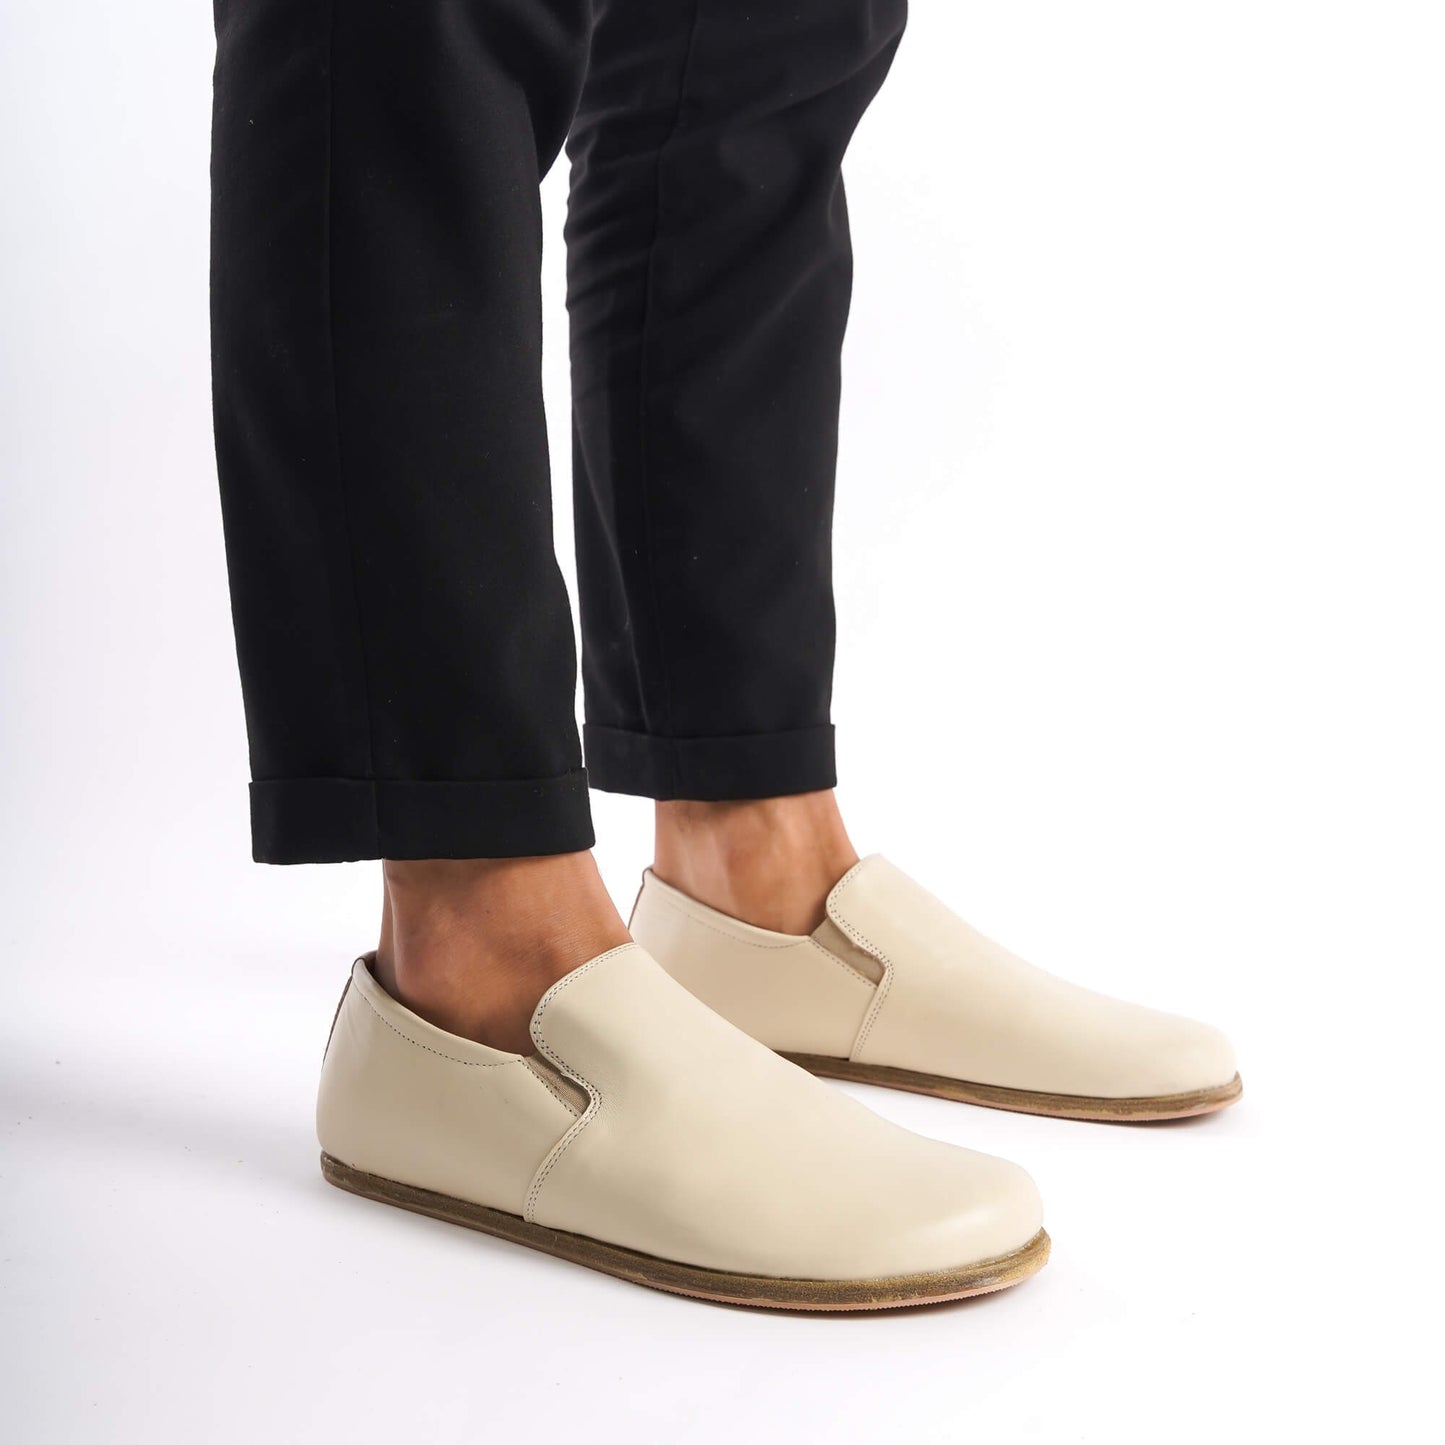 Side view of Ionia Leather Barefoot Men Loafers in beige, paired with black pants, emphasizing the sleek and comfortable design.